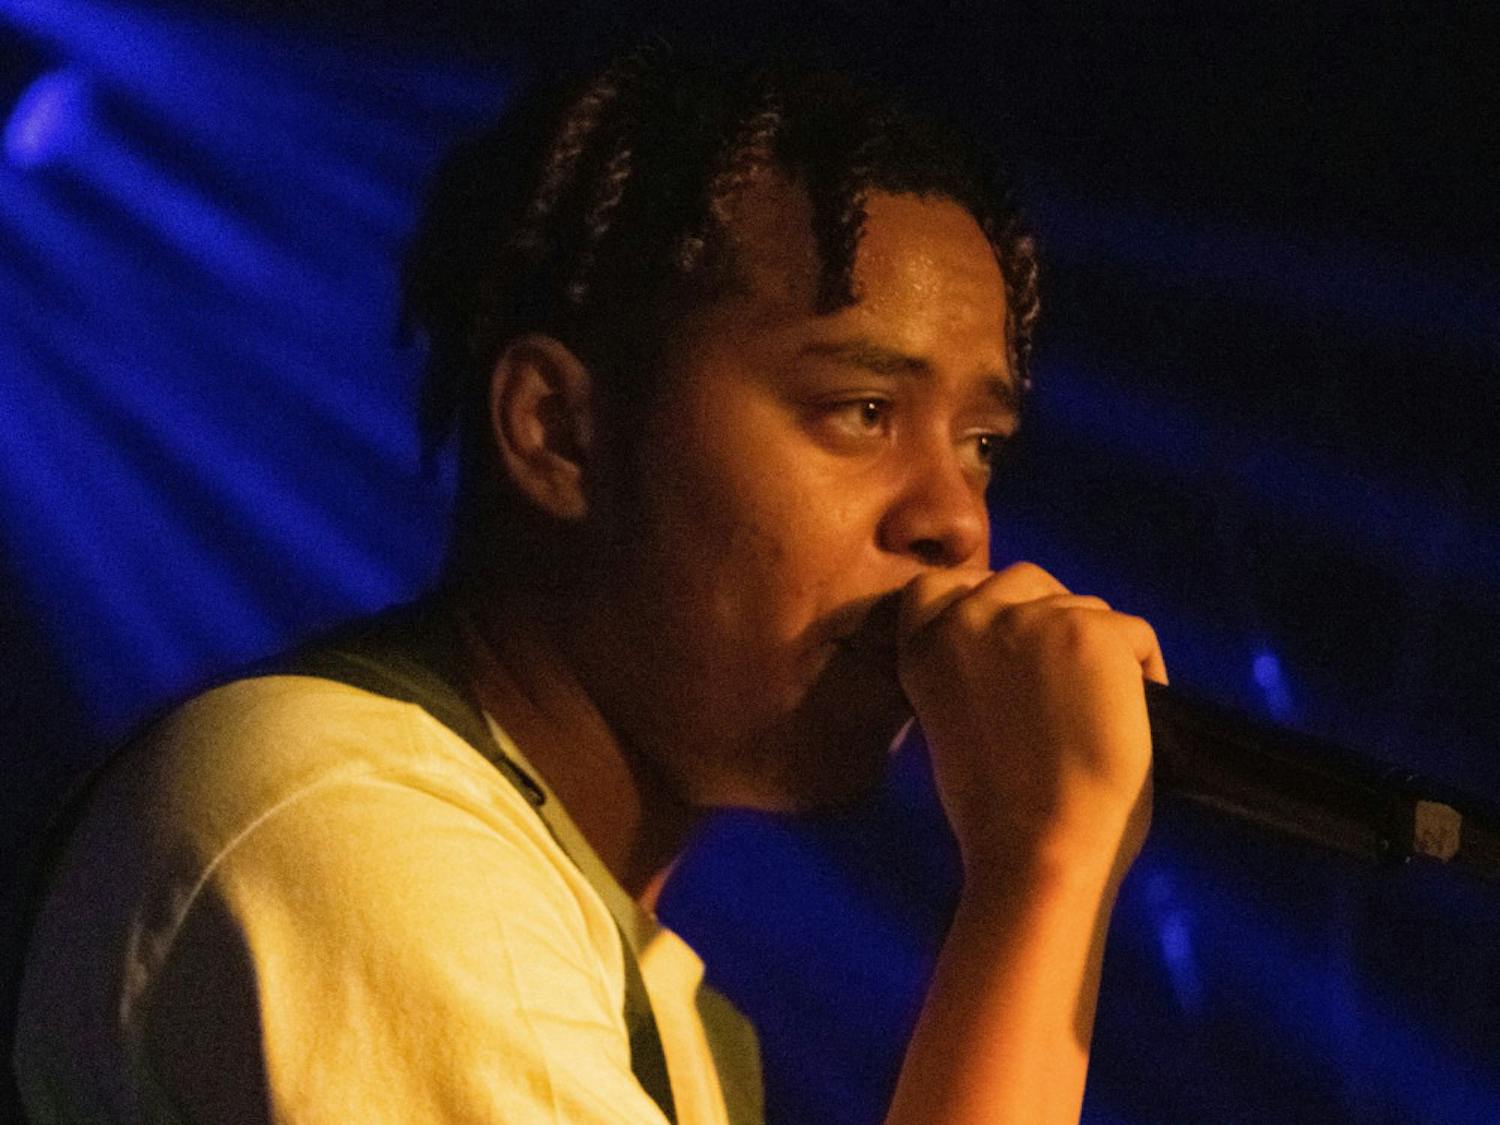 YBN Cordae raps on Friday night at the High Dive. He opened his set with "Wintertime."